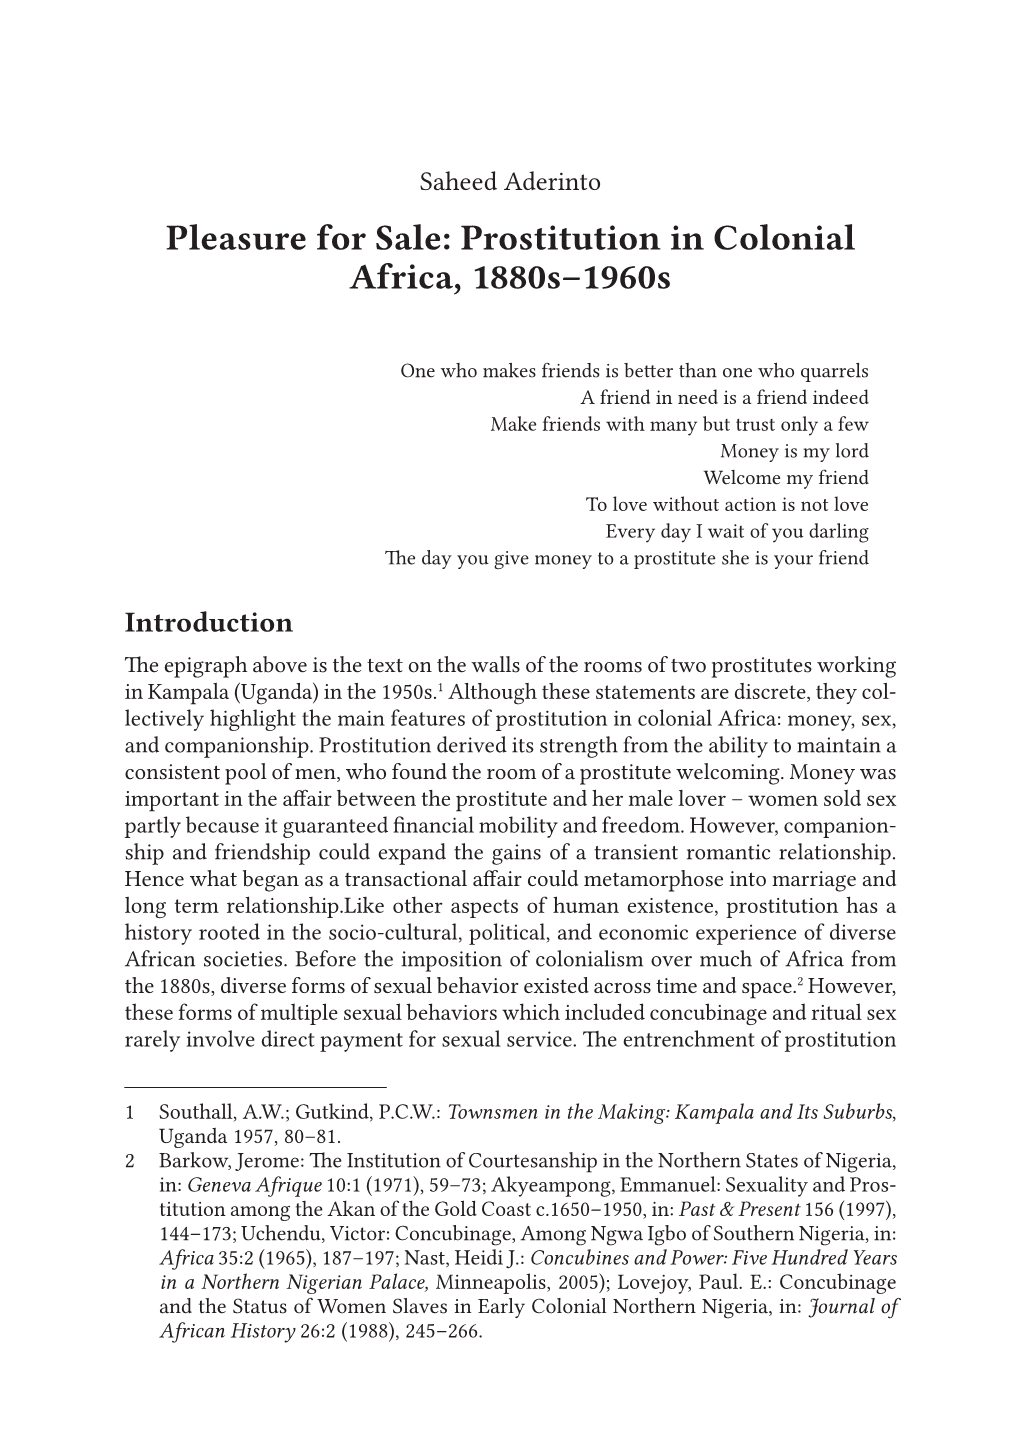 Pleasure for Sale: Prostitution in Colonial Africa, 1880S–1960S